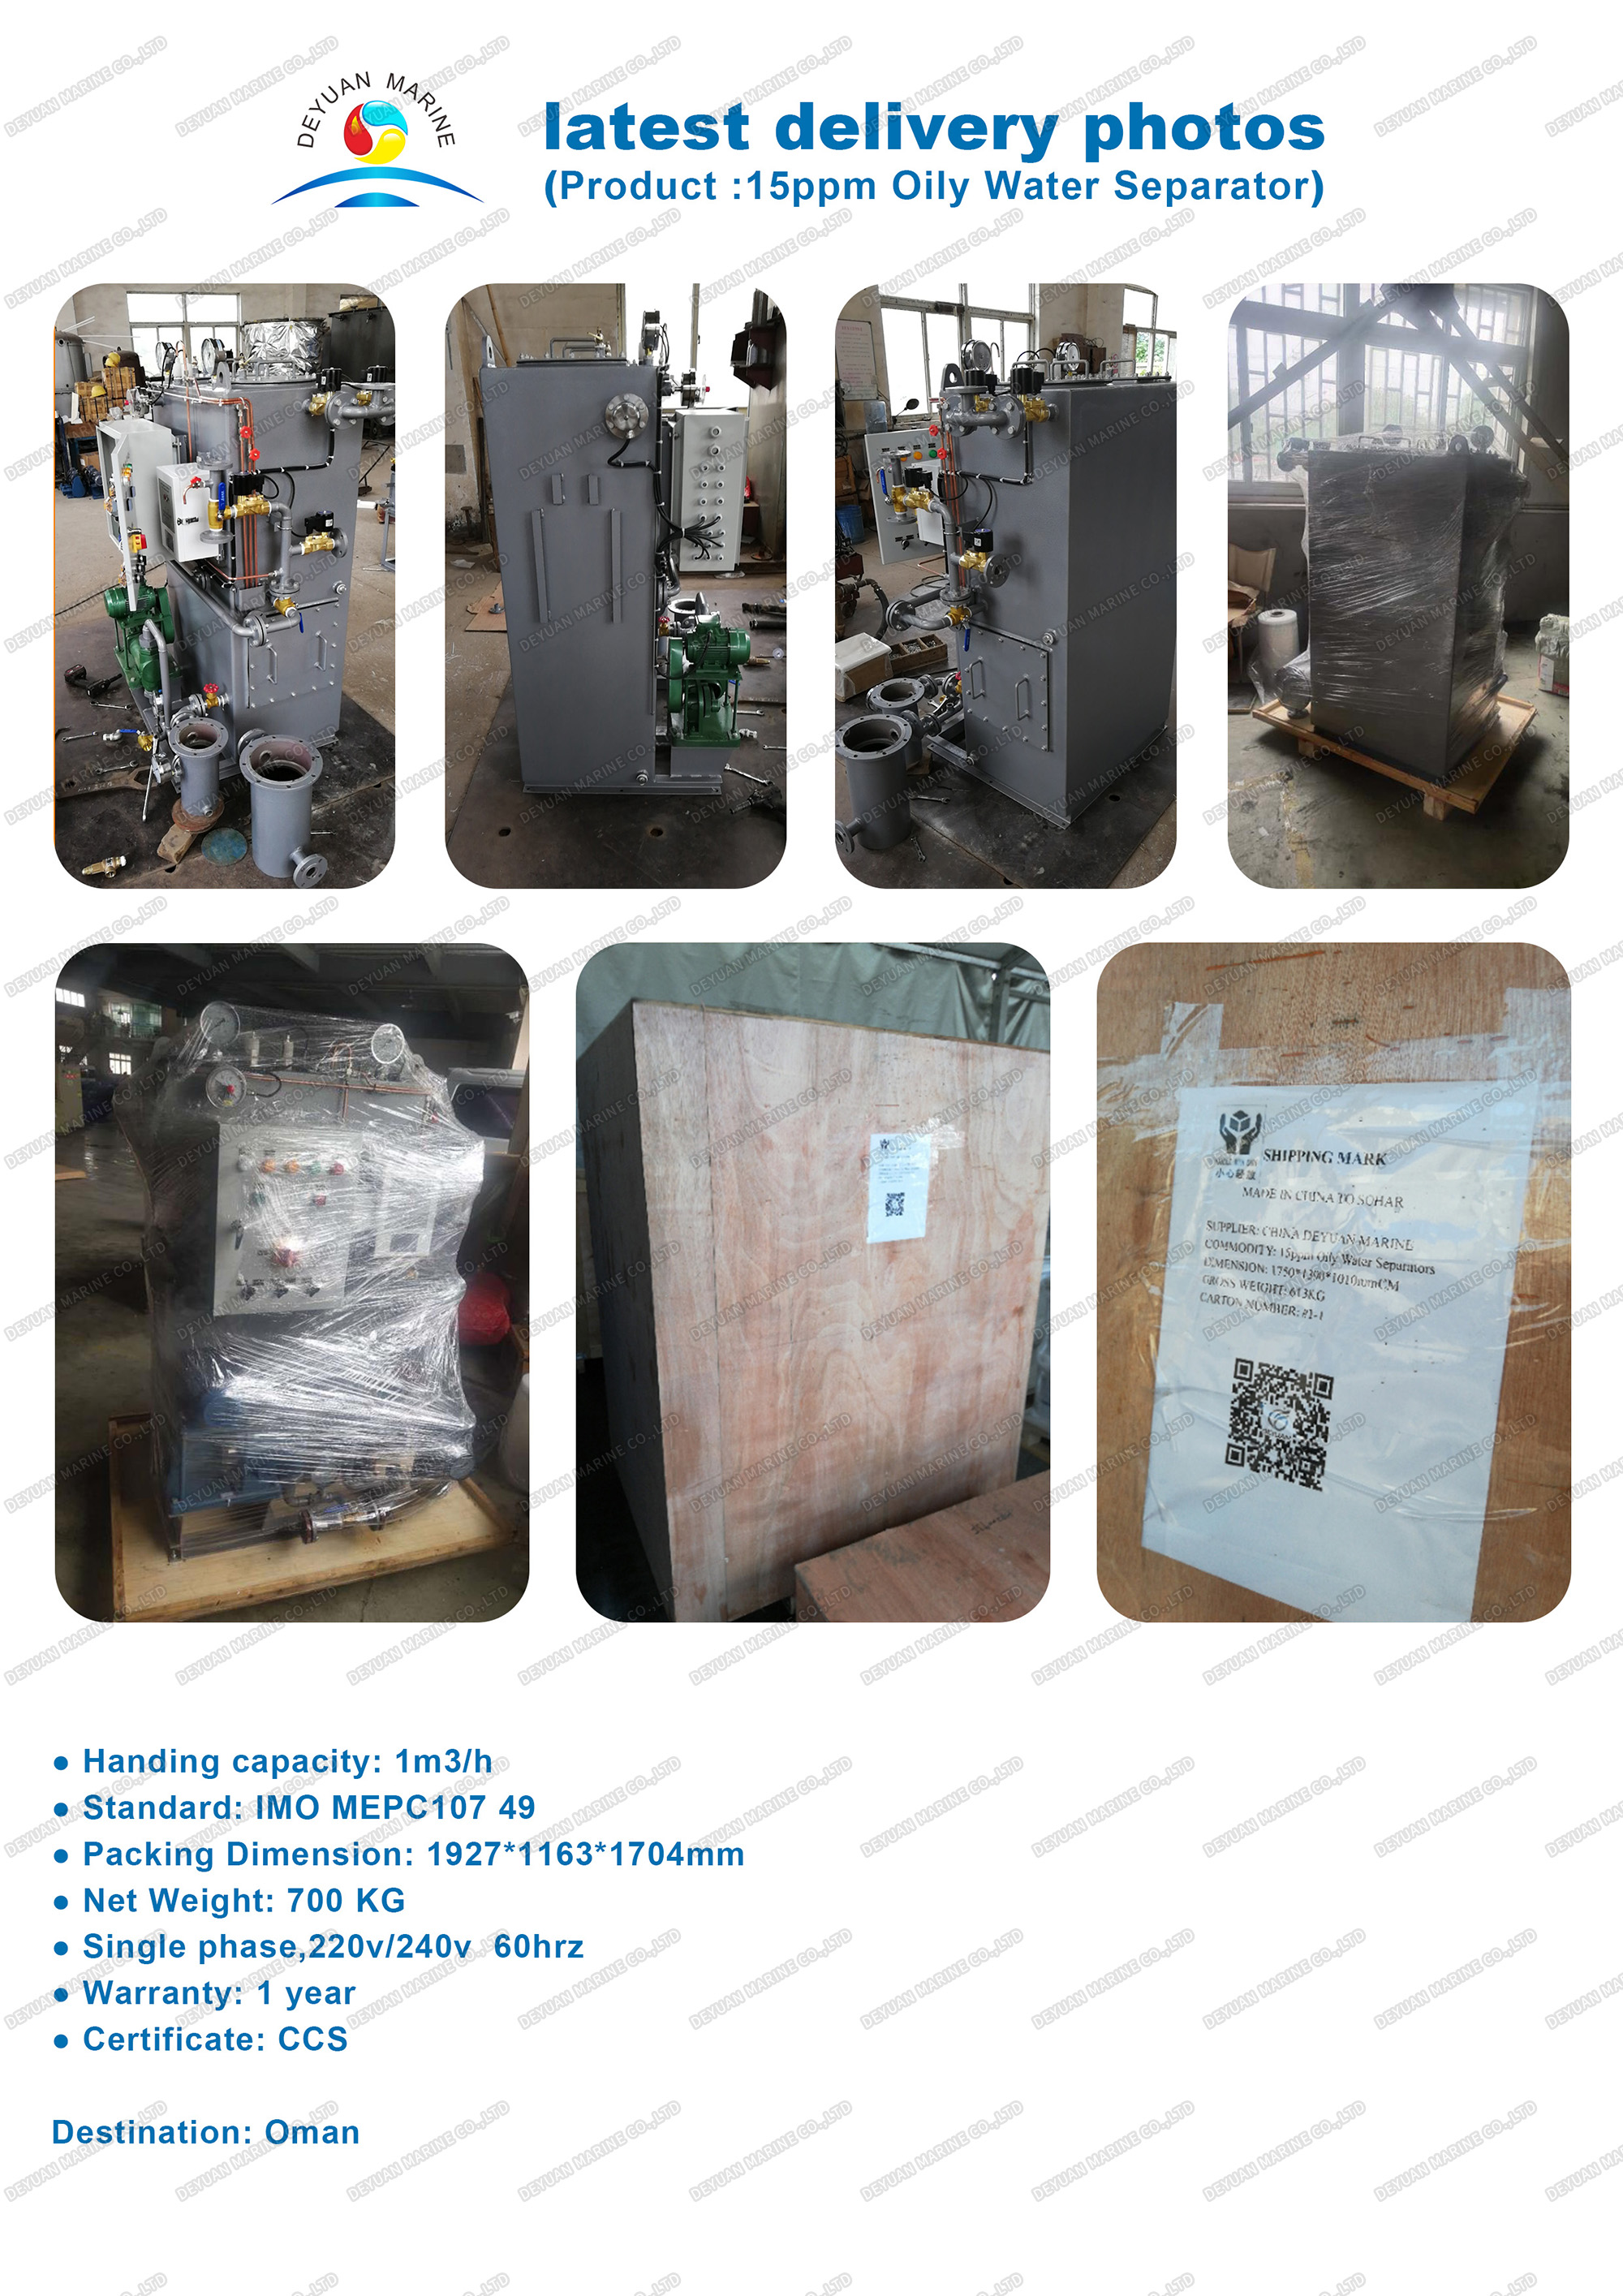 Latest Delivery of Oily Water Separator